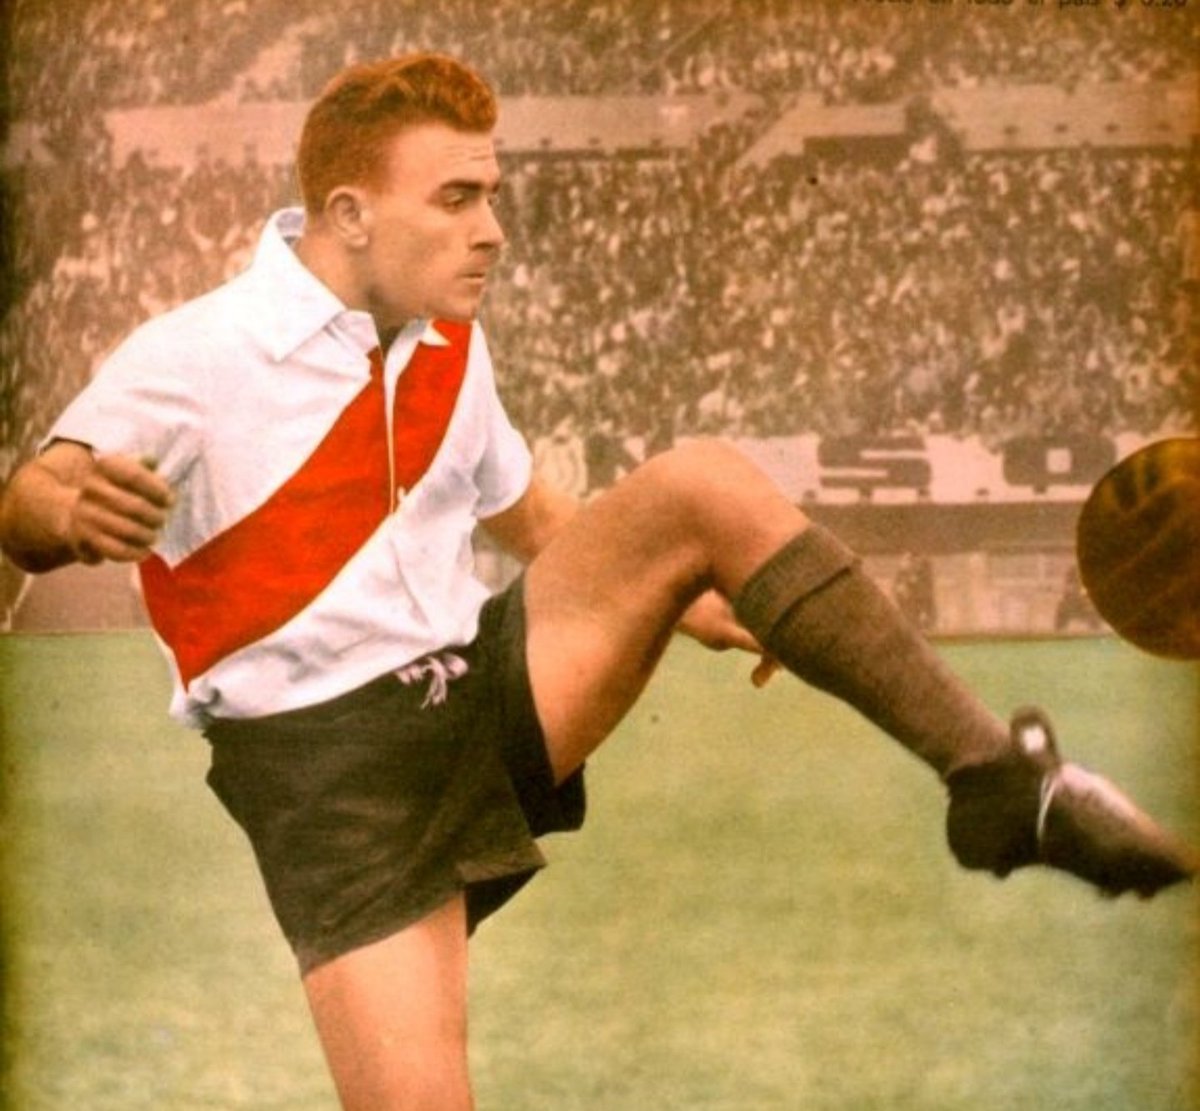 Di Stefano started his career at River Plate. He scored 49 goals in 66 league games and won them the league title, twice. Then, he moved to Millionarios and won them the league title 3 times in 4 years, and became the club's 2nd highest all time goalscorer. 